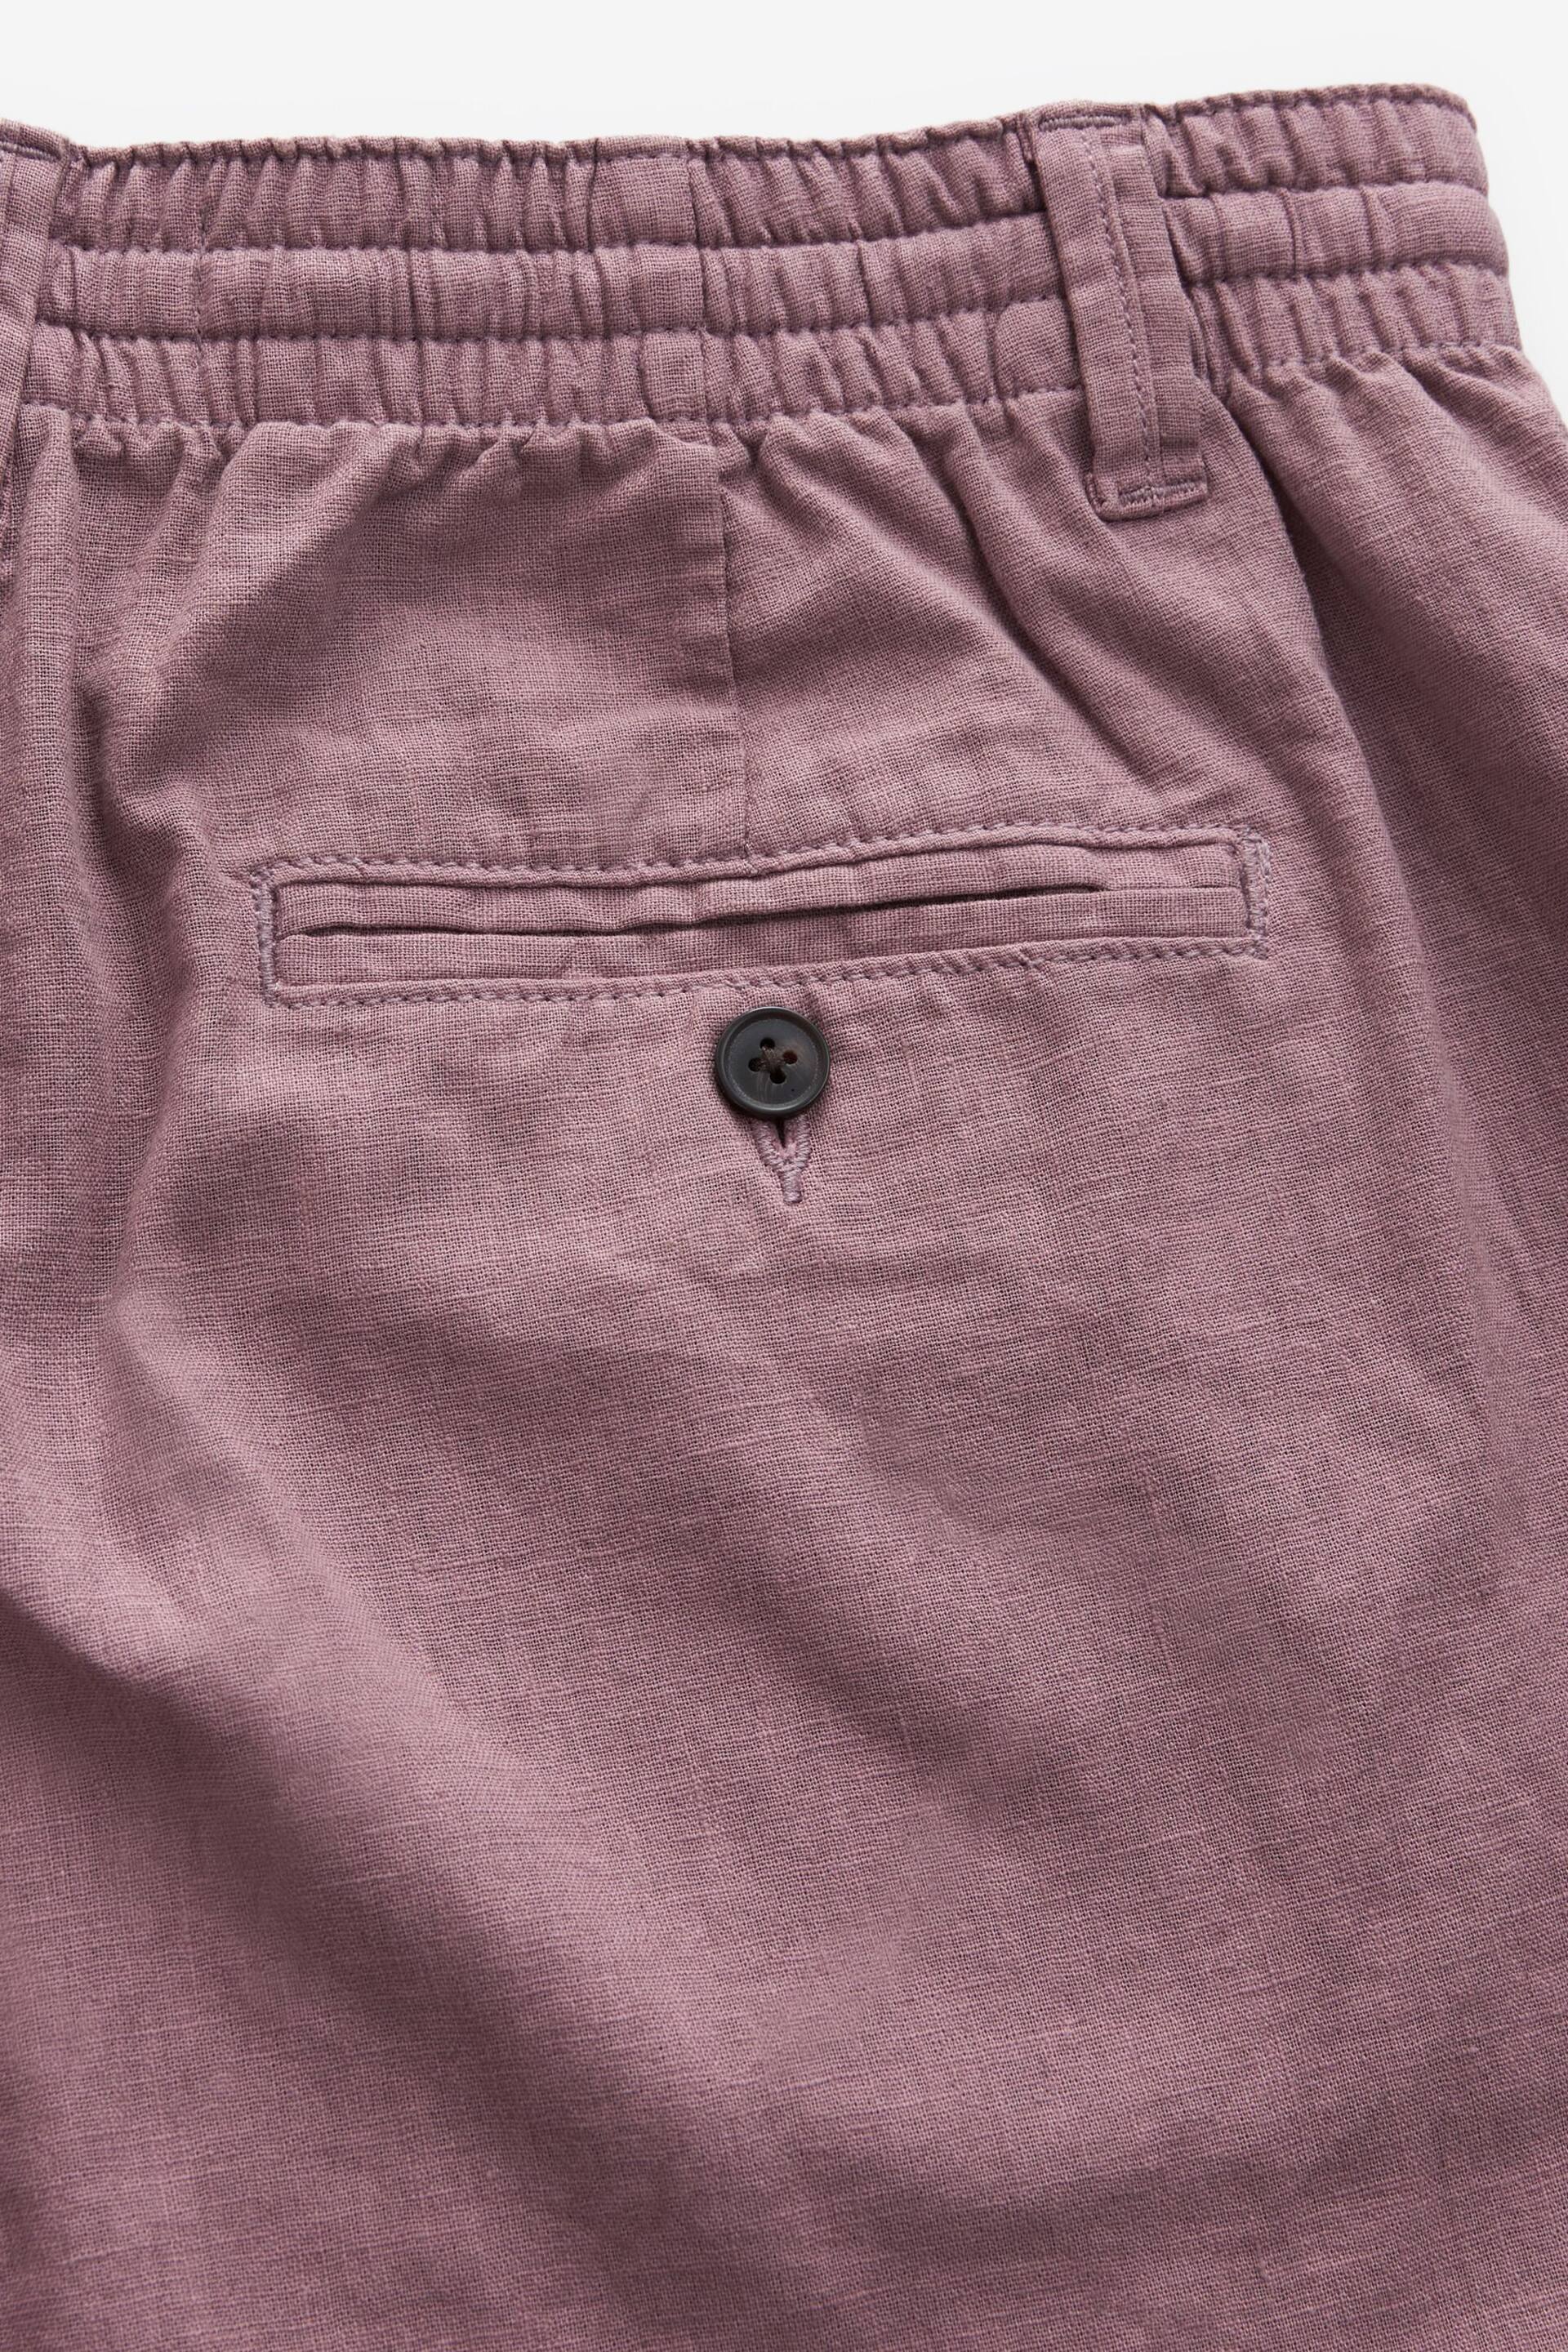 Pink Linen Blend Chino Shorts - Image 7 of 9